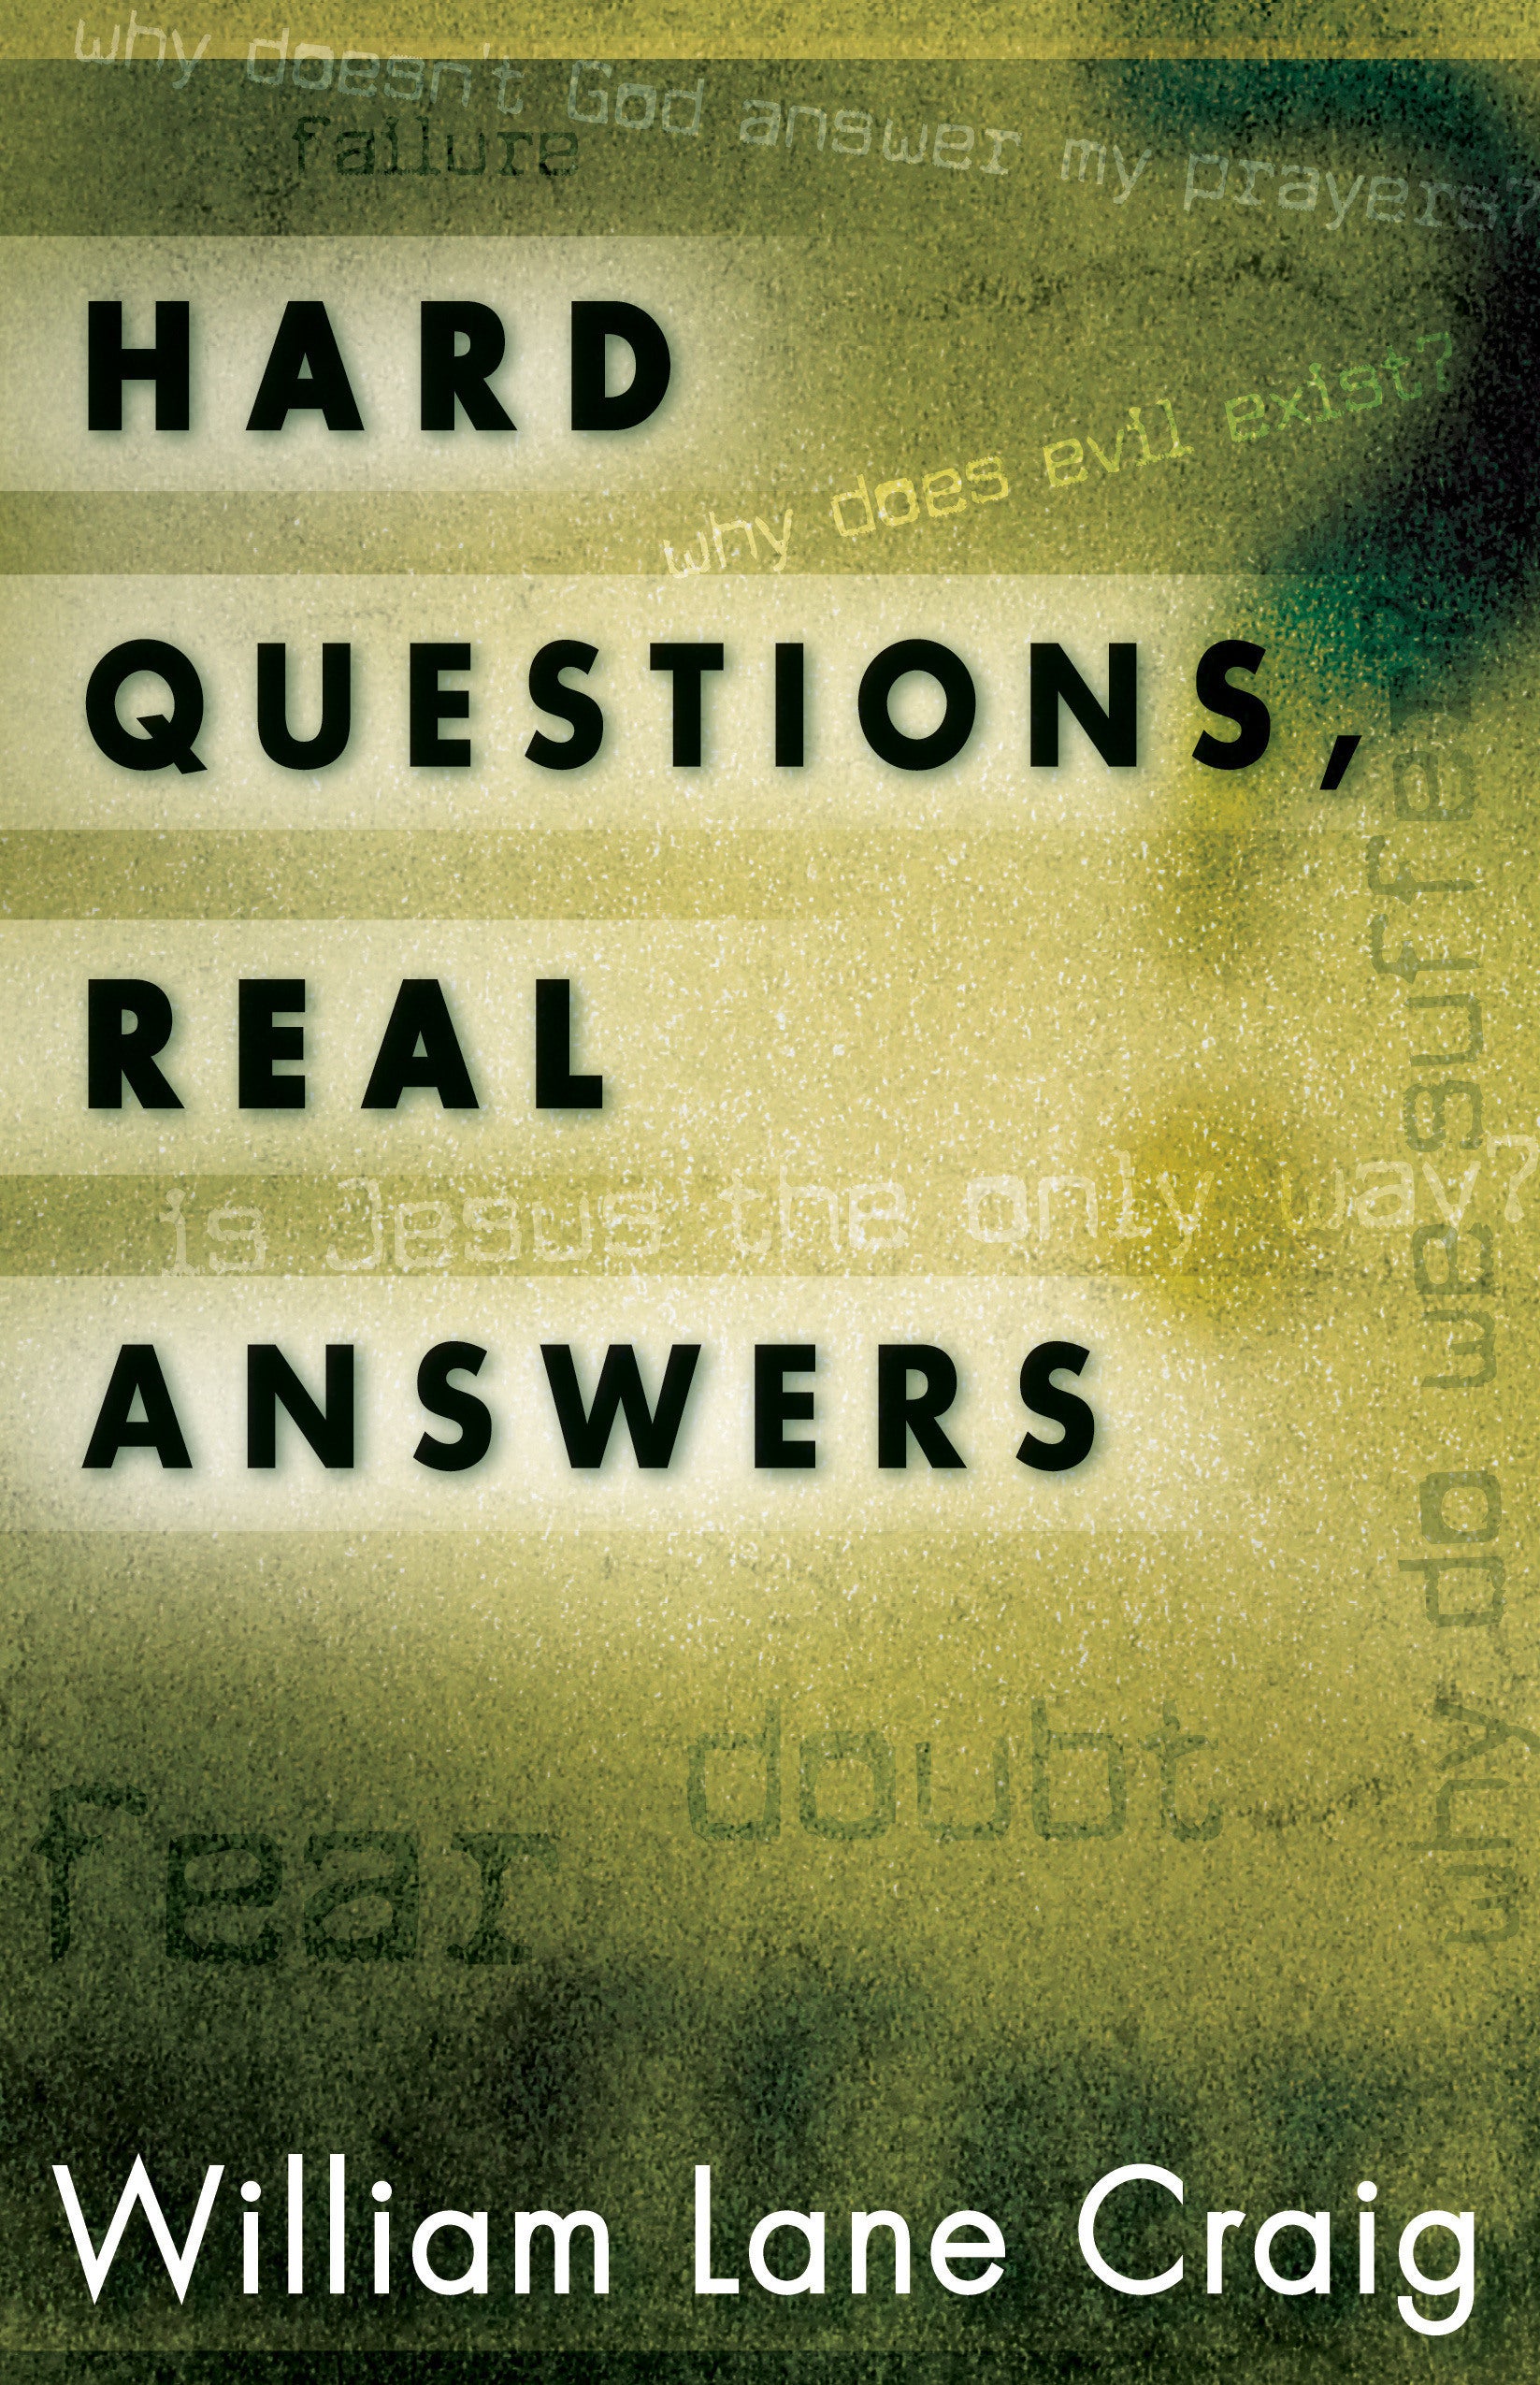 Image of Hard Questions, Real Answers other